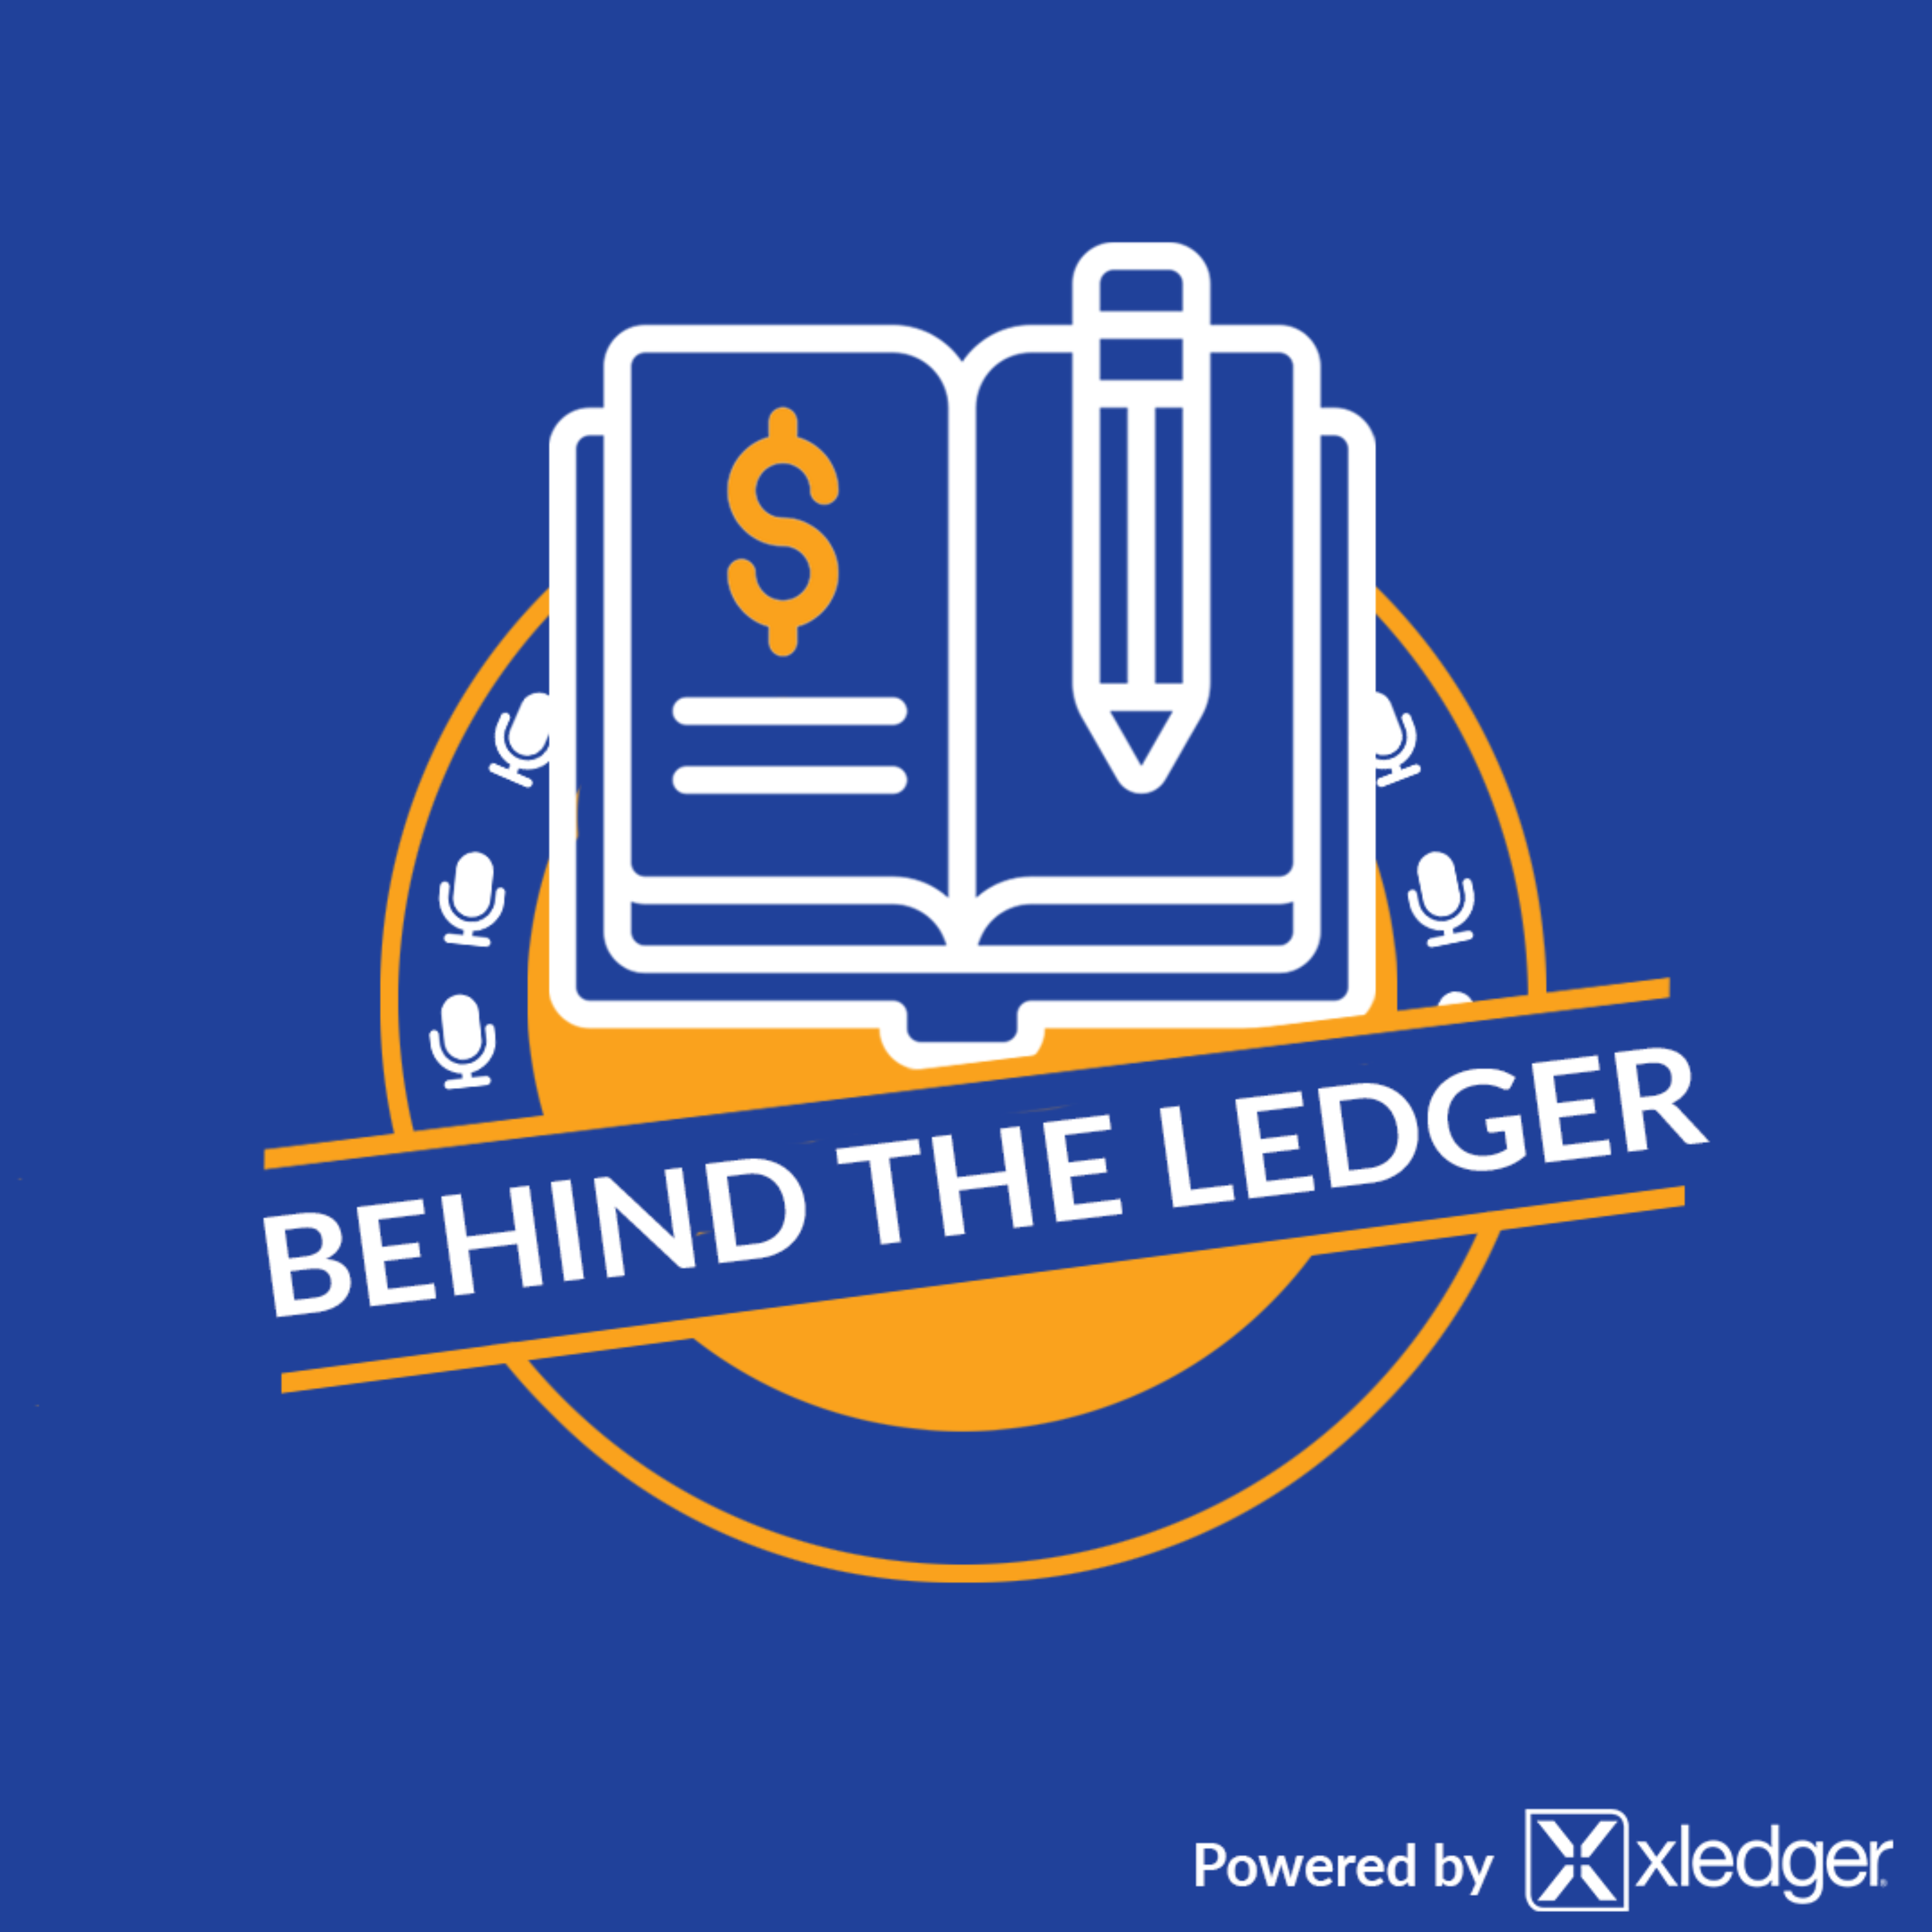 Behind the Ledger